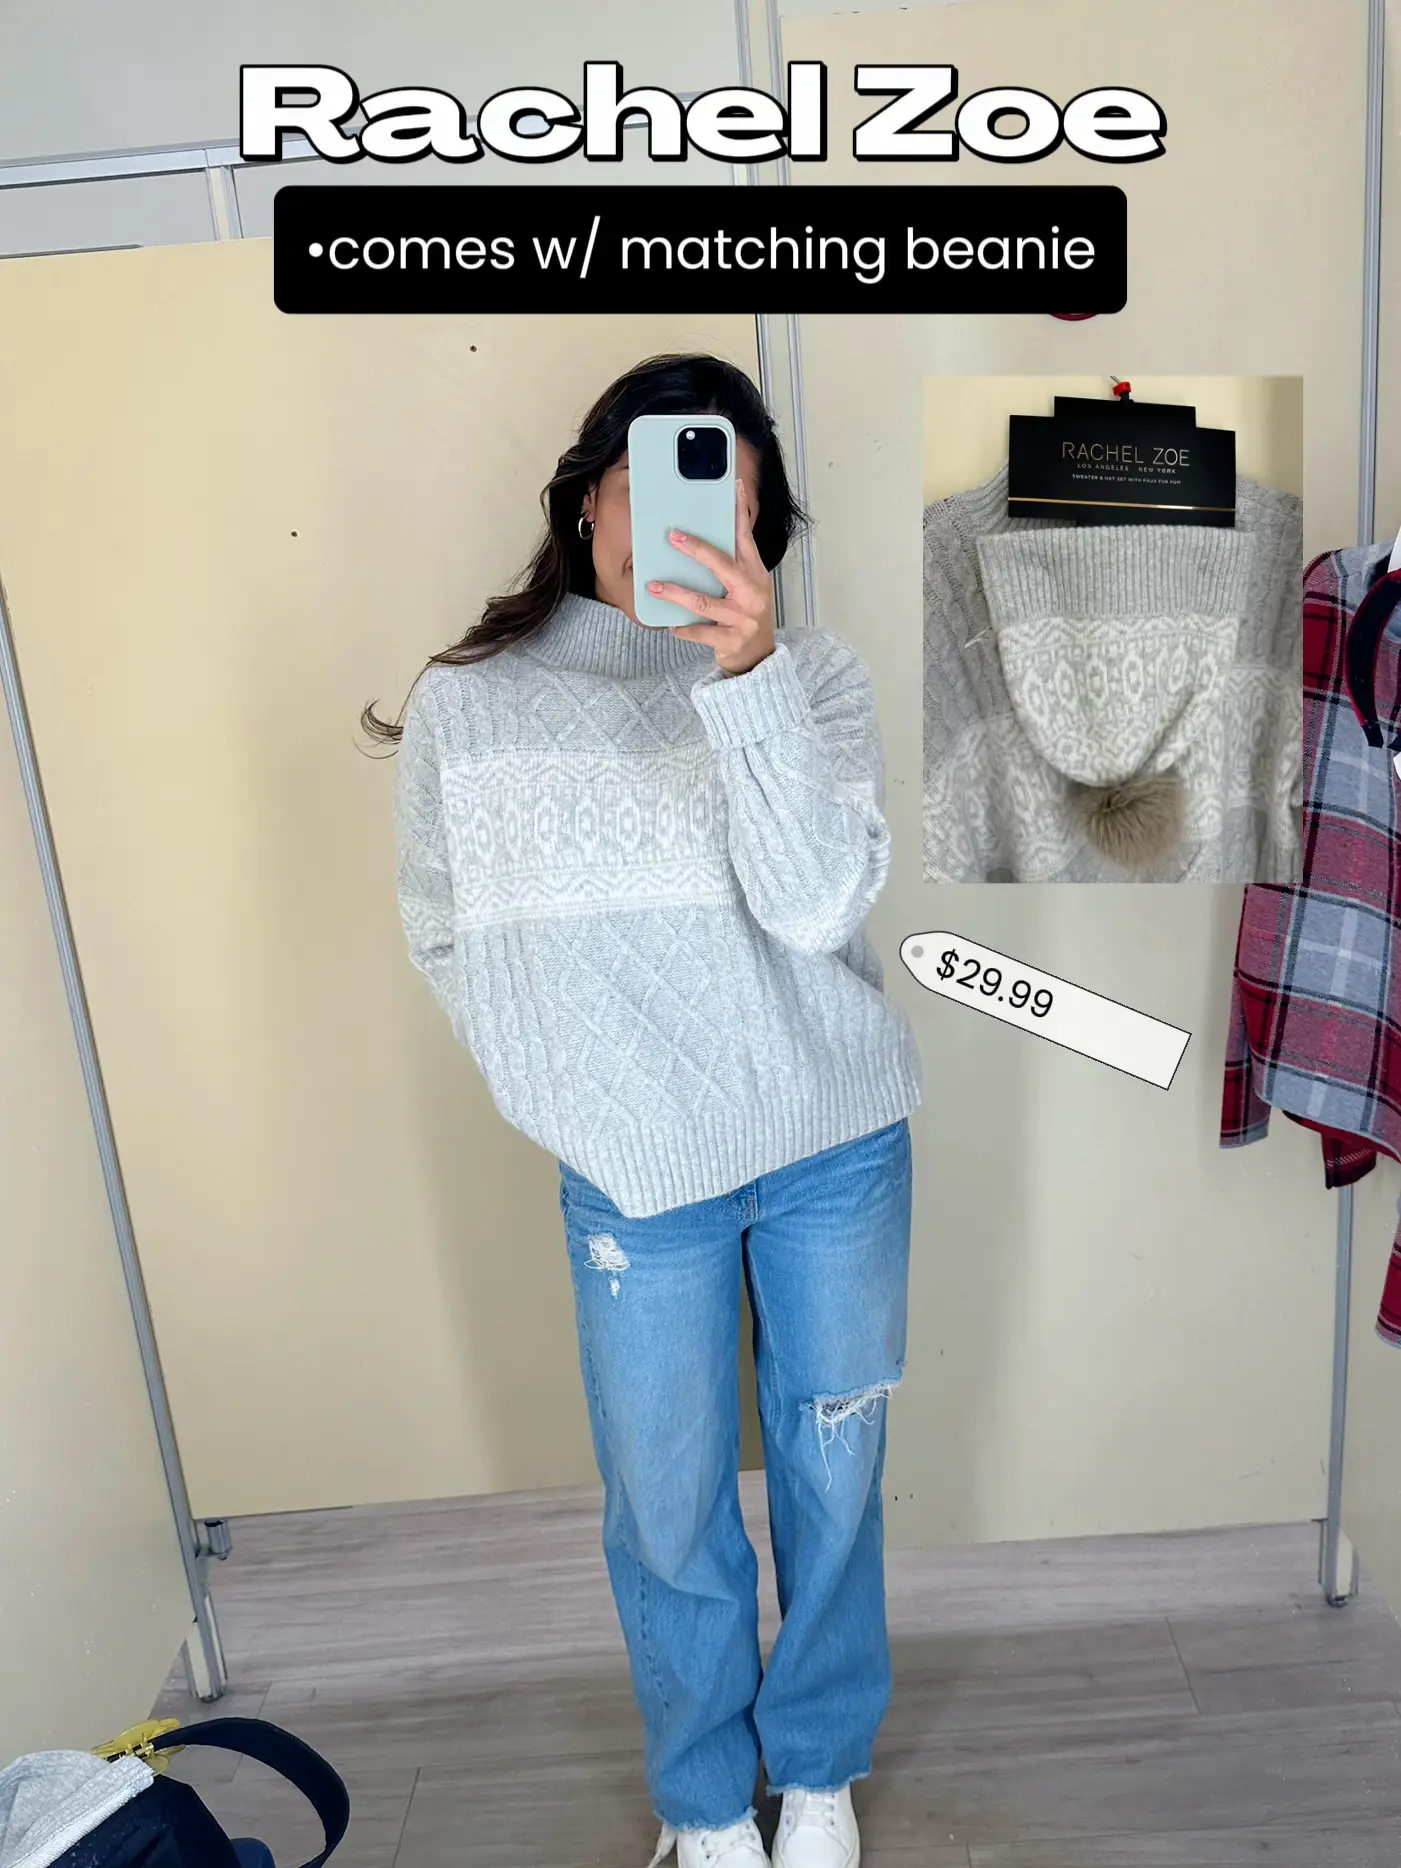  A woman in a white sweater and jeans is taking a selfie in a store.